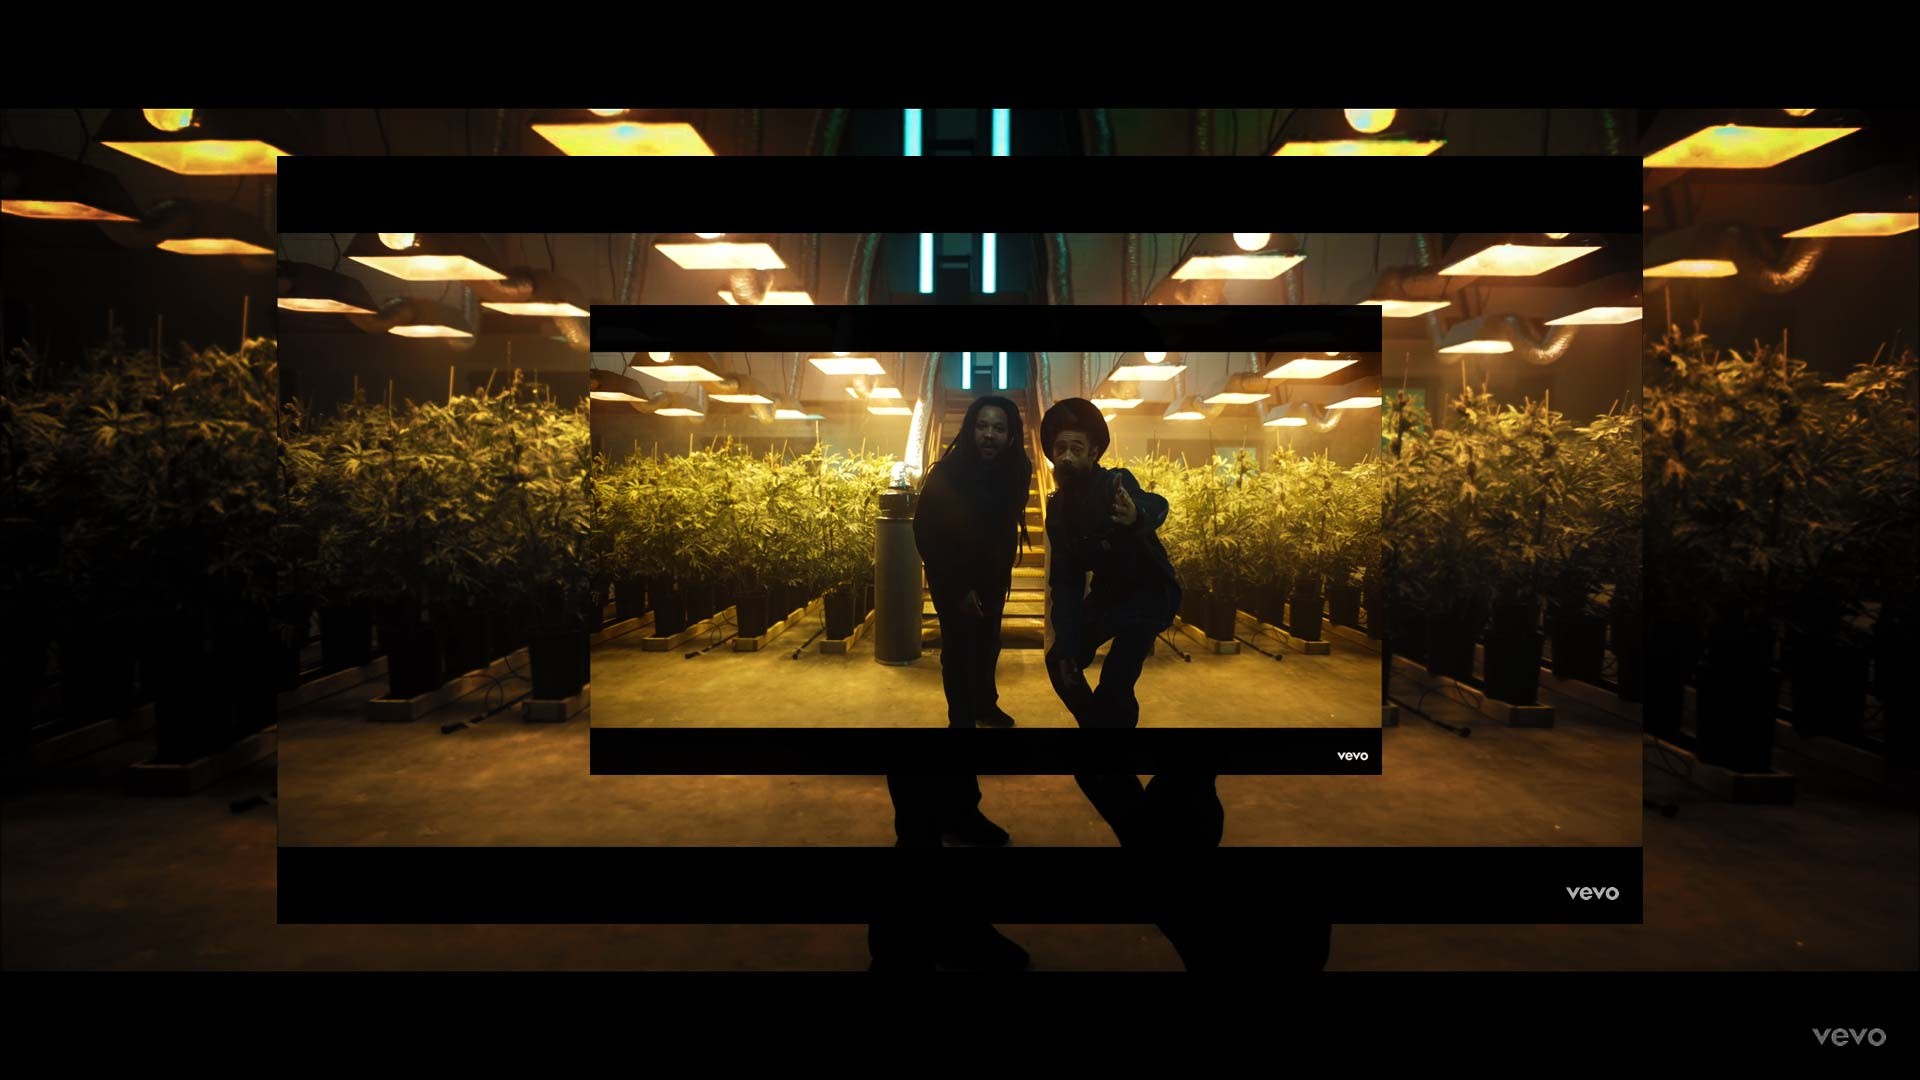 1920x1080 Now 100 full time workers are growing cannabis and making extracts, in  partnership with Damian Marley. Damian Marley destroys bars with bars.